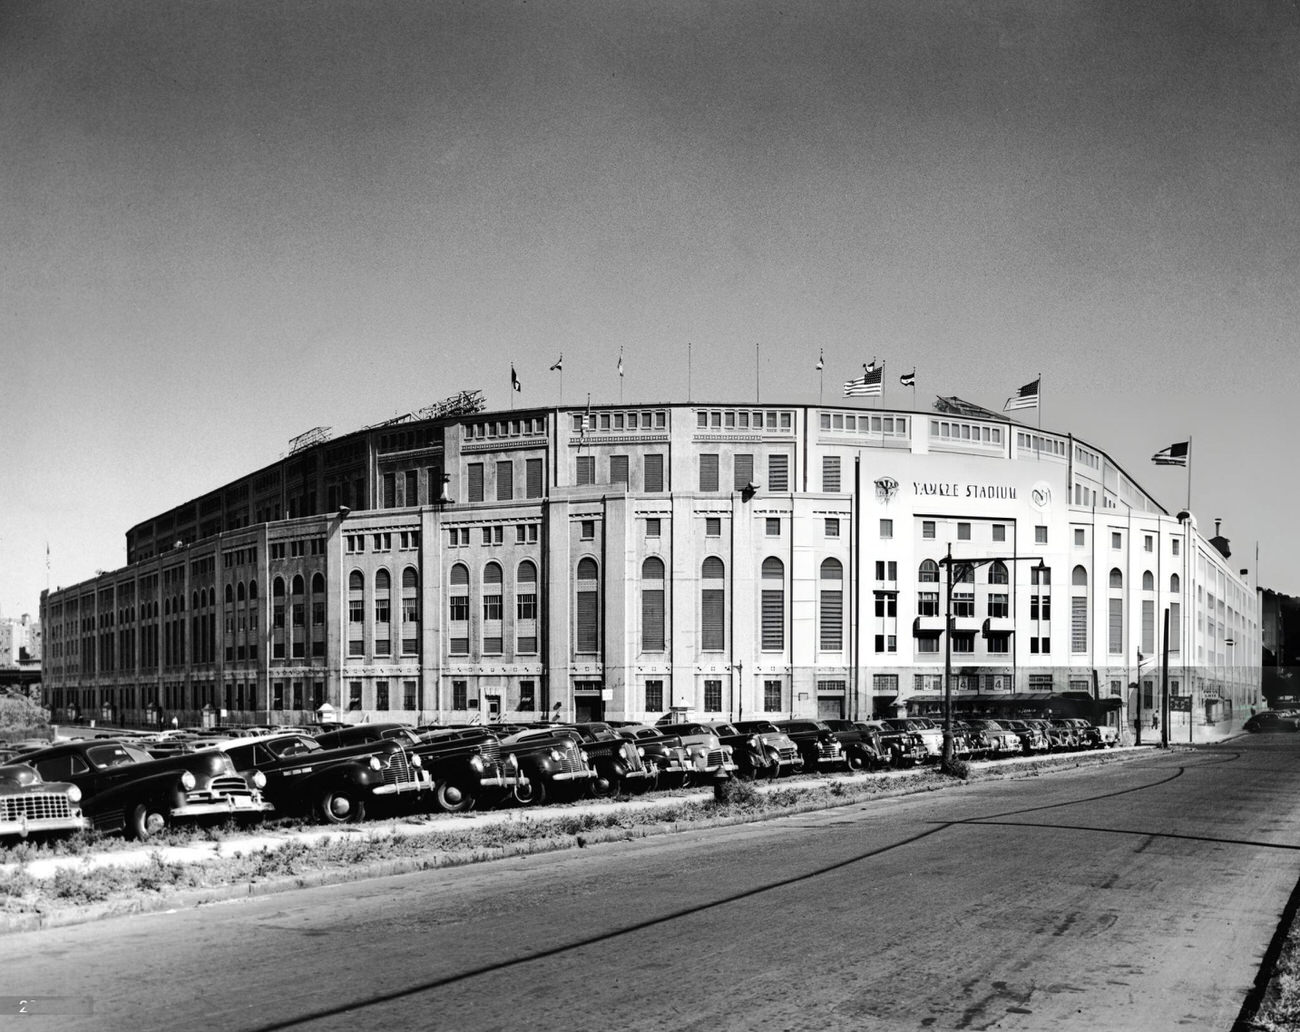 A General View Of Yankee Stadium And Its Full Parking Lot, Circa 1950.